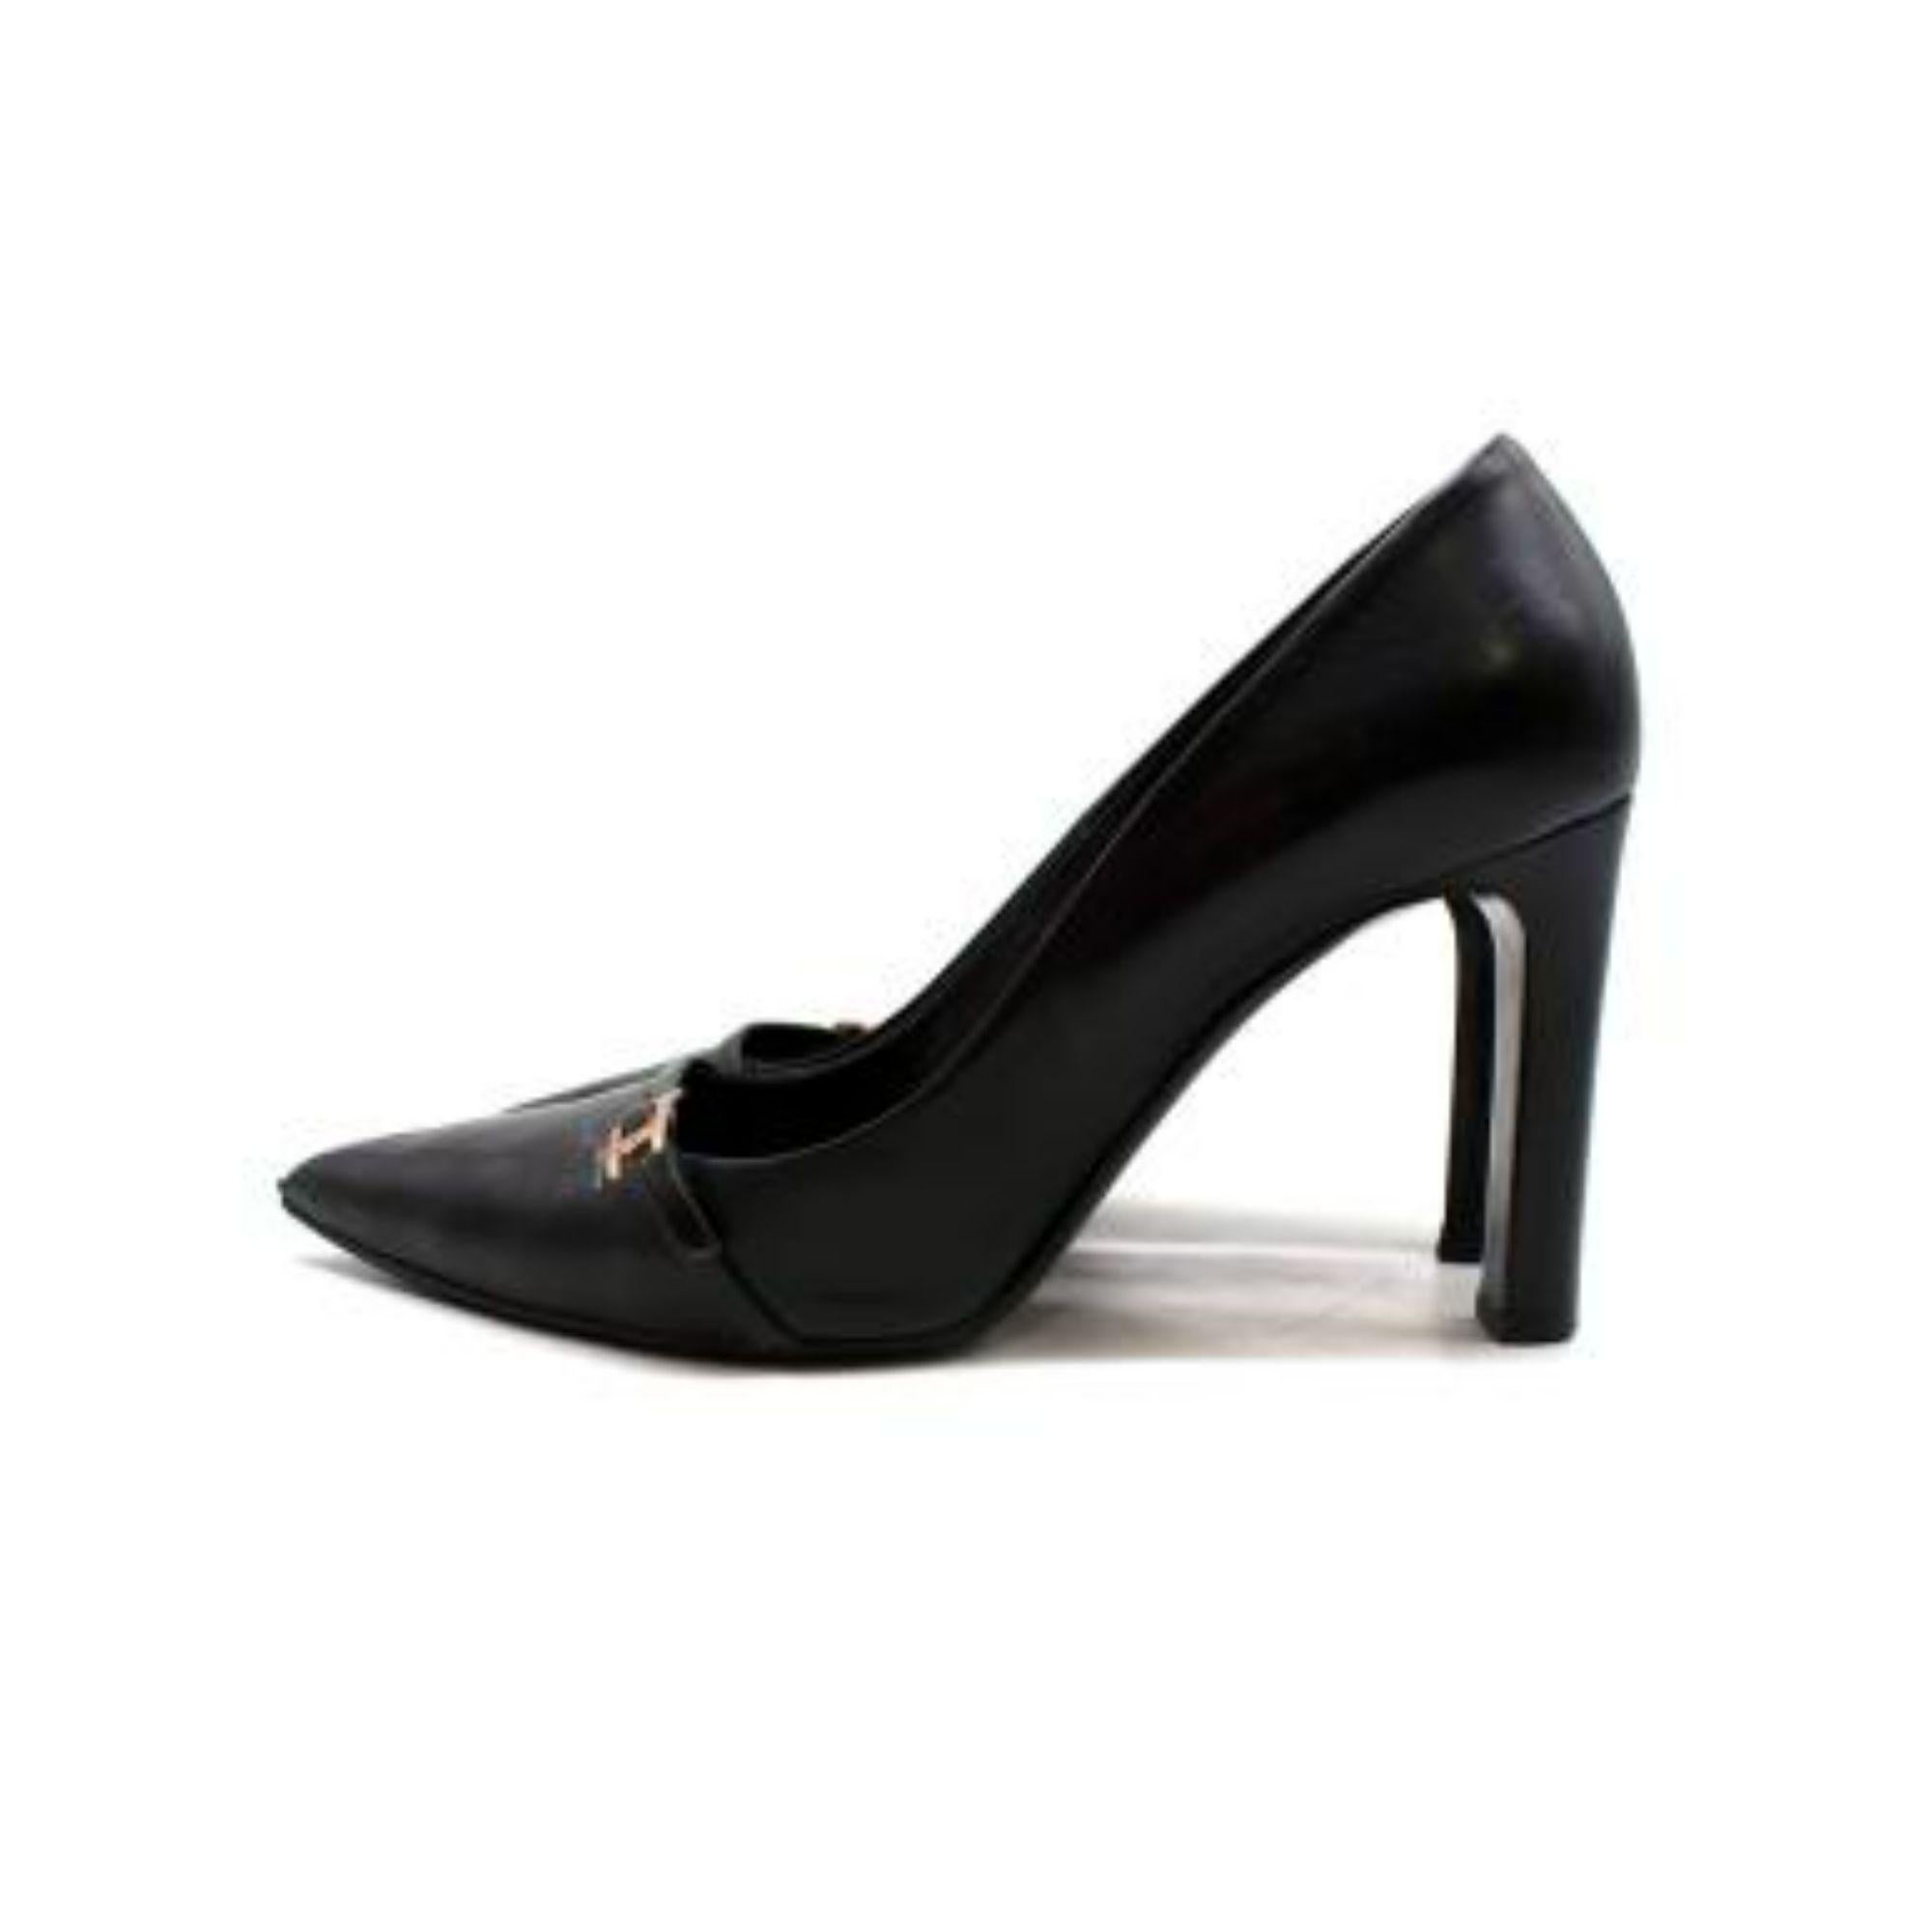 Hermes Hapi Buckle Black Leather Point Toe Pumps

- Pointed toes
- Buckle detailing
- Black leather body
- Branded and leathered insoles

Material
Leather

Made in Italy

9.5/10 Excellent condition

PLEASE NOTE, THESE ITEMS ARE PRE-OWNED AND MAY